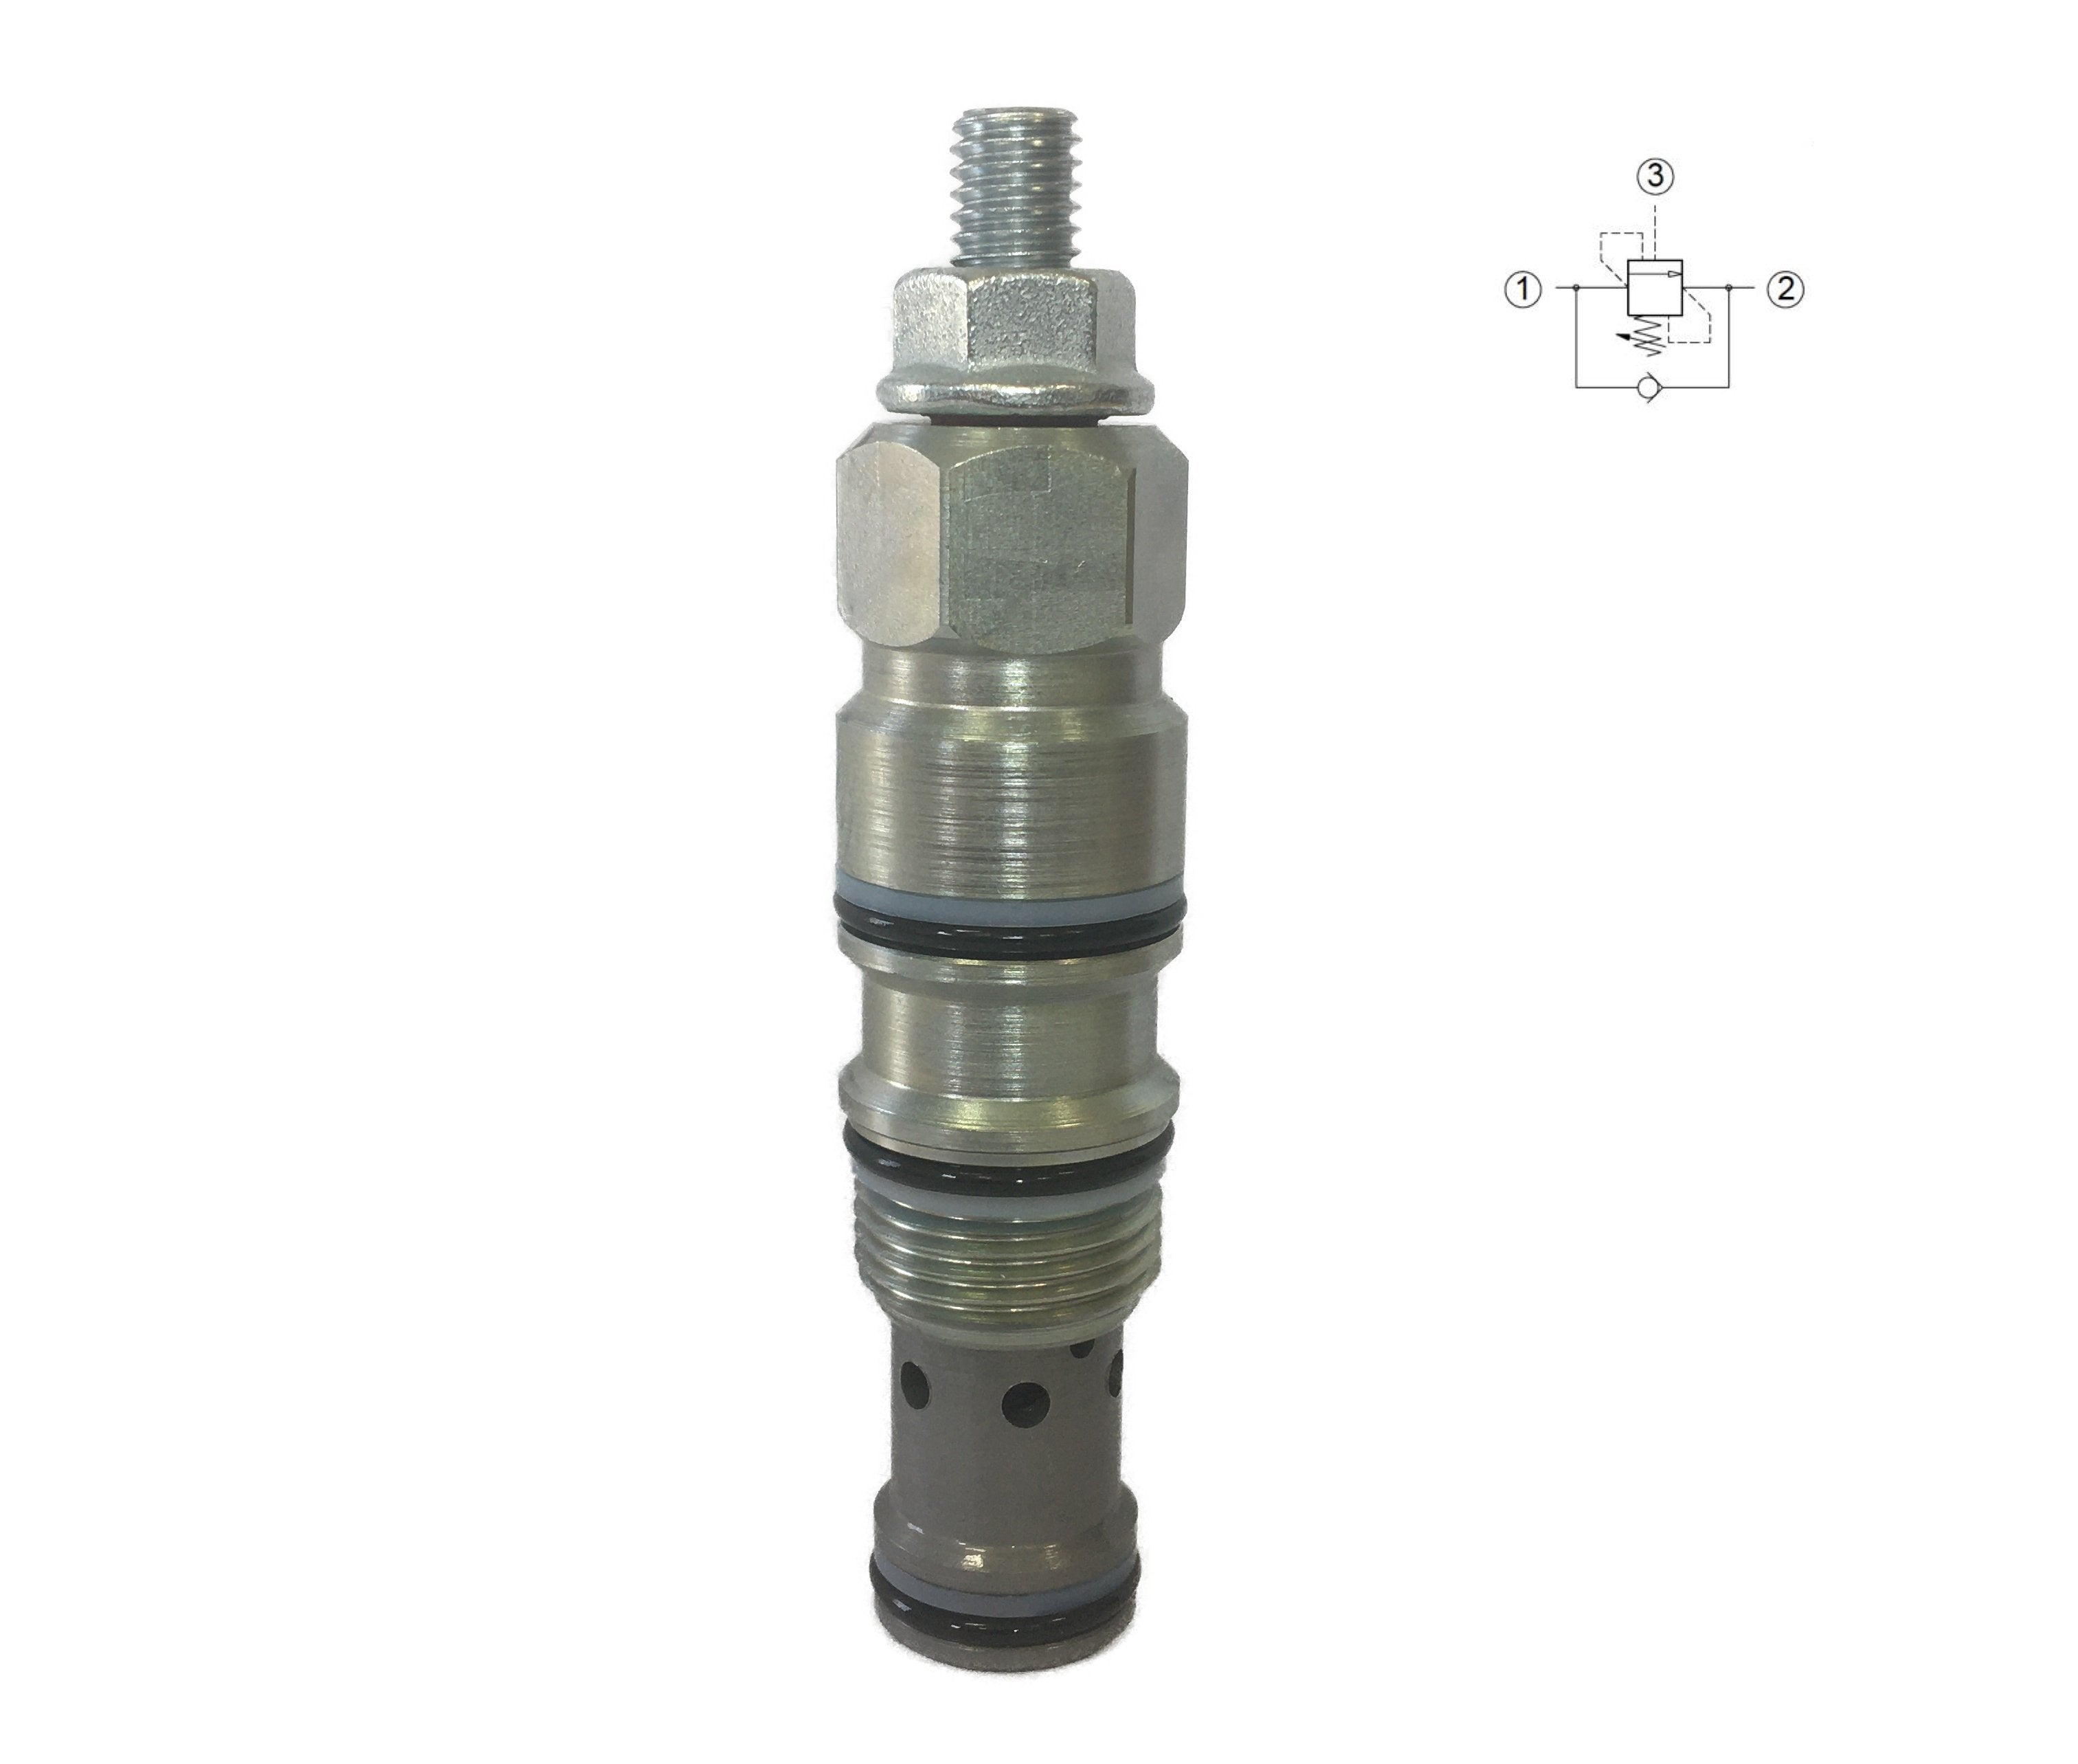 C000D280031100A : Valvole Counterbalance, 3:1, 16 GPM, 5000psi, 2030 to 5075psi adjustable, 4060psi Preset, T-11A